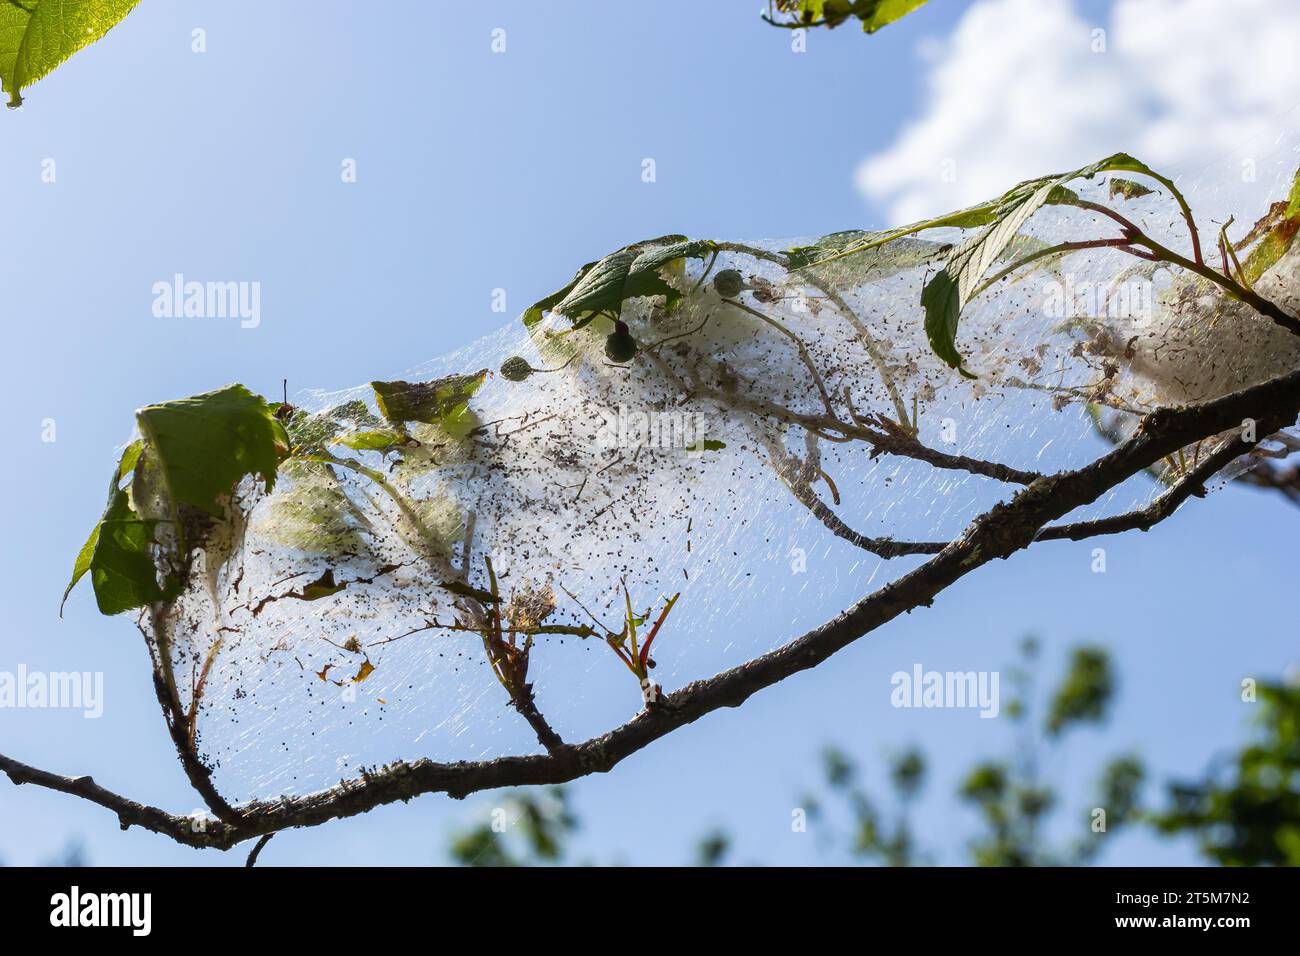 Group of Larvae of Bird-cherry ermine Yponomeuta evonymella pupate in tightly packed communal, white web on a tree trunk and branches among green leav Stock Photo